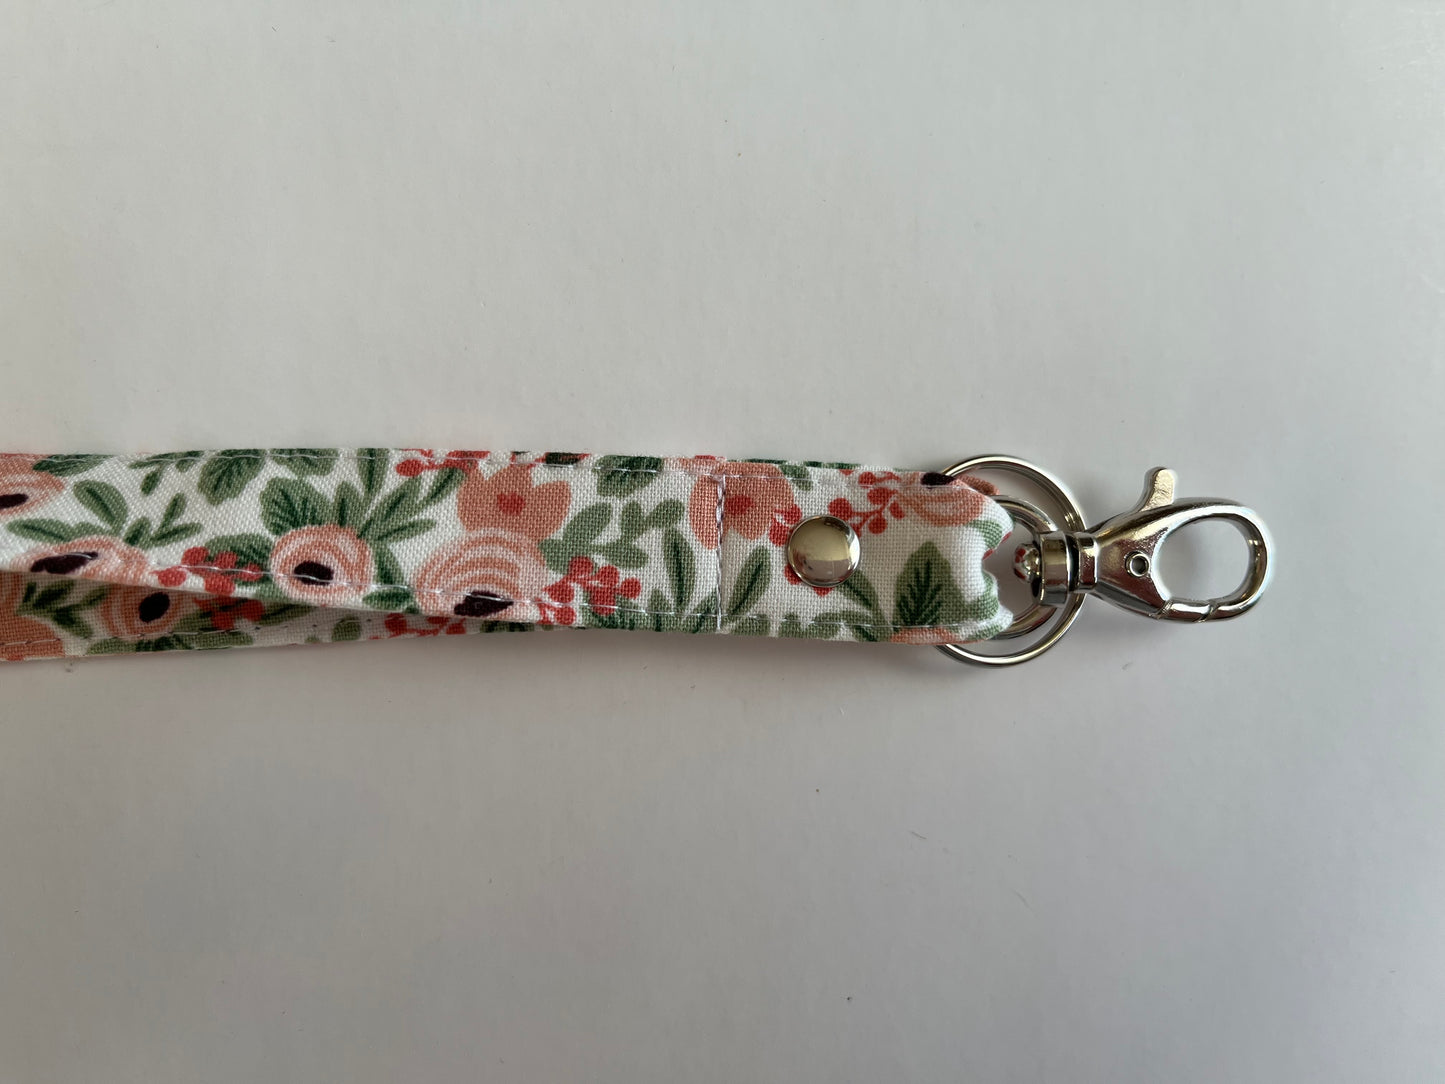 Floral Lanyard for ID Badge and Keys with Breakaway Clasp